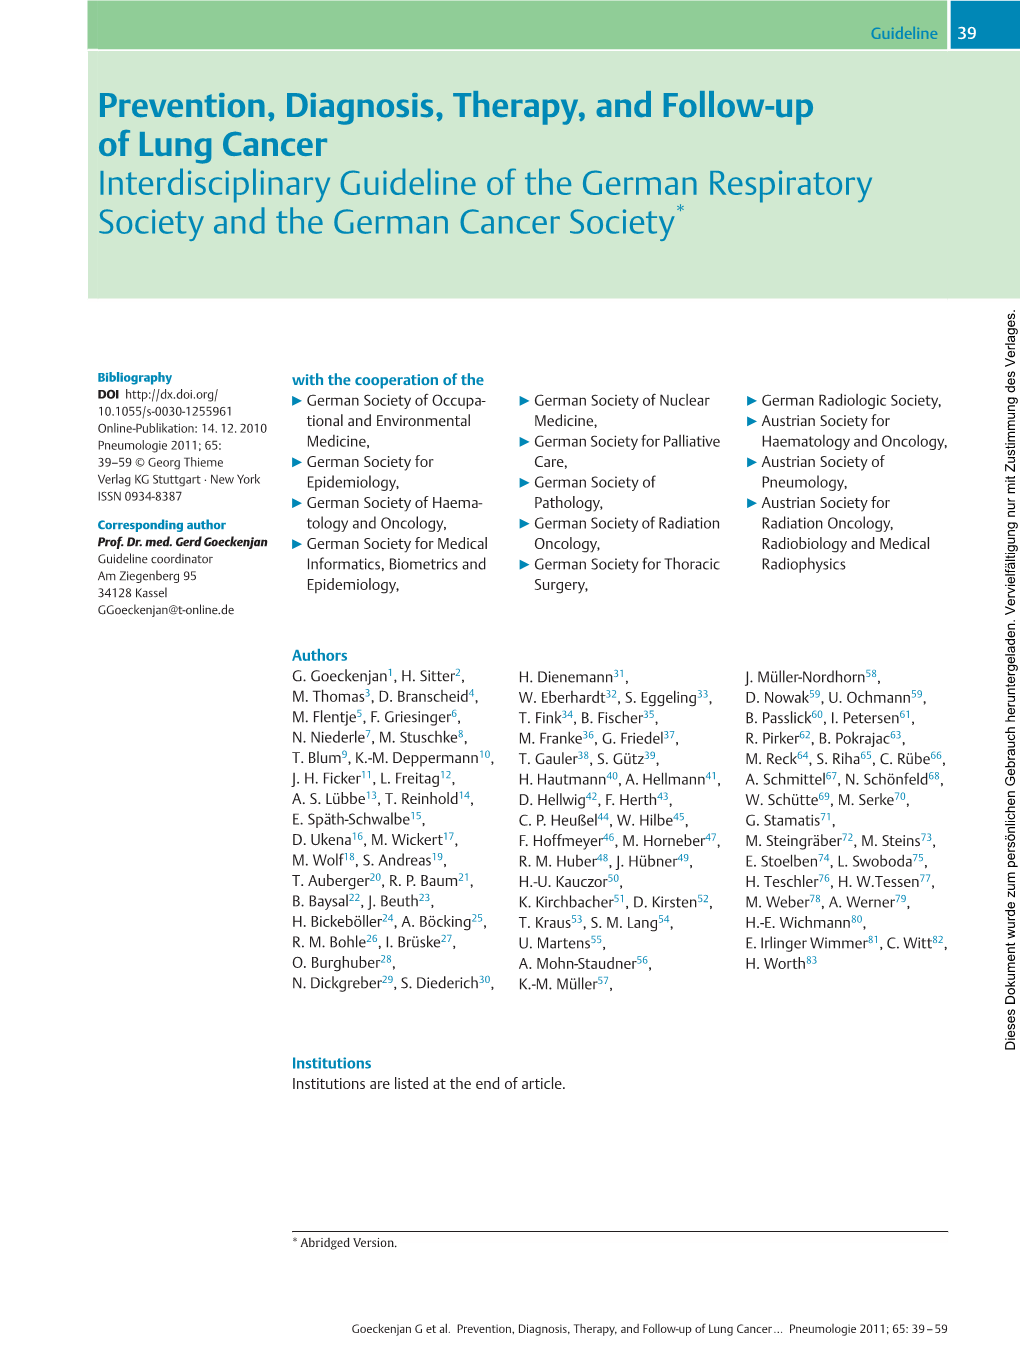 Prevention, Diagnosis, Therapy, and Follow-Up of Lung Cancer Interdisciplinary Guideline of the German Respiratory Society and the German Cancer Society*